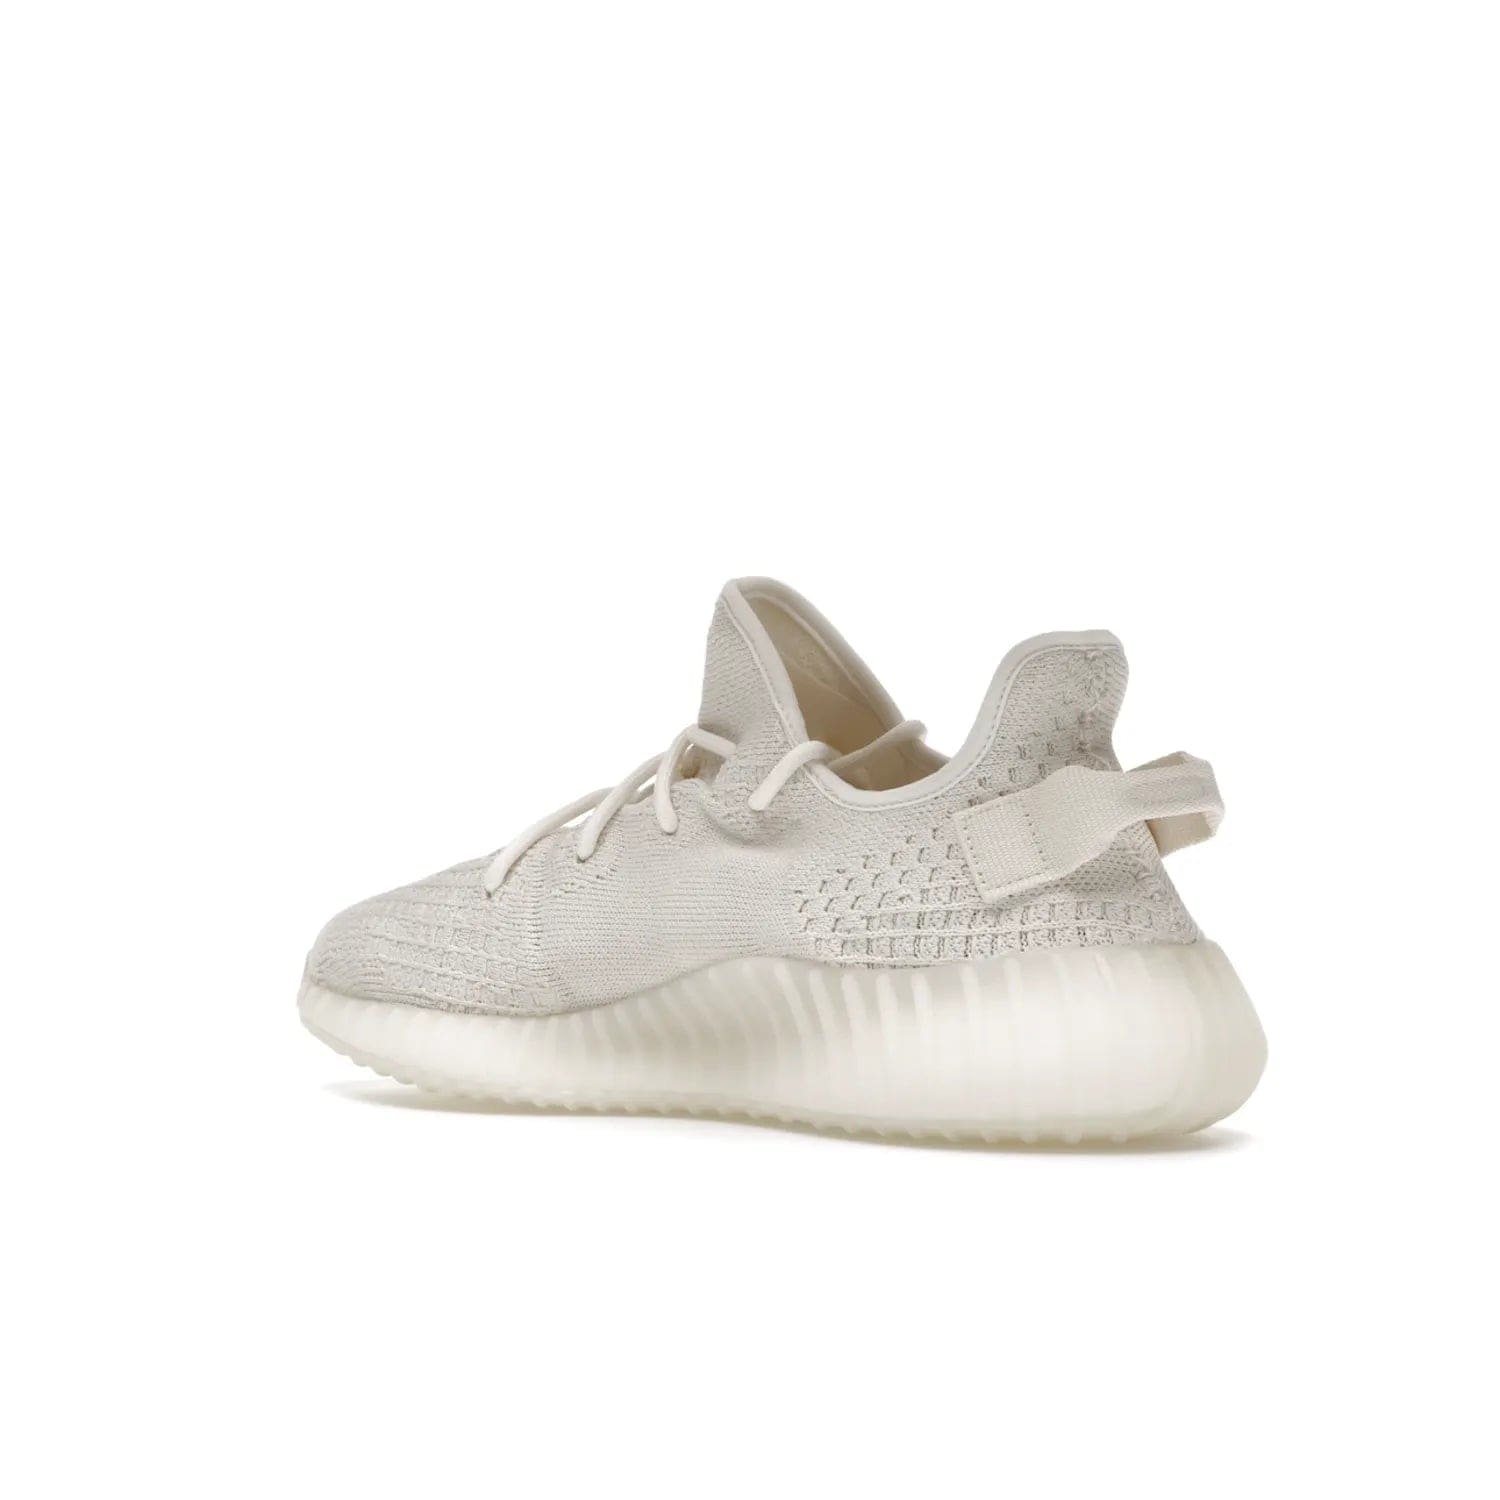 adidas Yeezy Boost 350 V2 Bone - Image 23 - Only at www.BallersClubKickz.com - Grab the stylish and comfortable adidas Yeezy Boost 350 V2 Bone in March 2022. This sneaker features a triple white Primeknit upper, mesh side stripes and canvas heel tabs, sitting atop a semi-translucent sole with Boost technology. Sure to keep your feet comfortable and stylish!